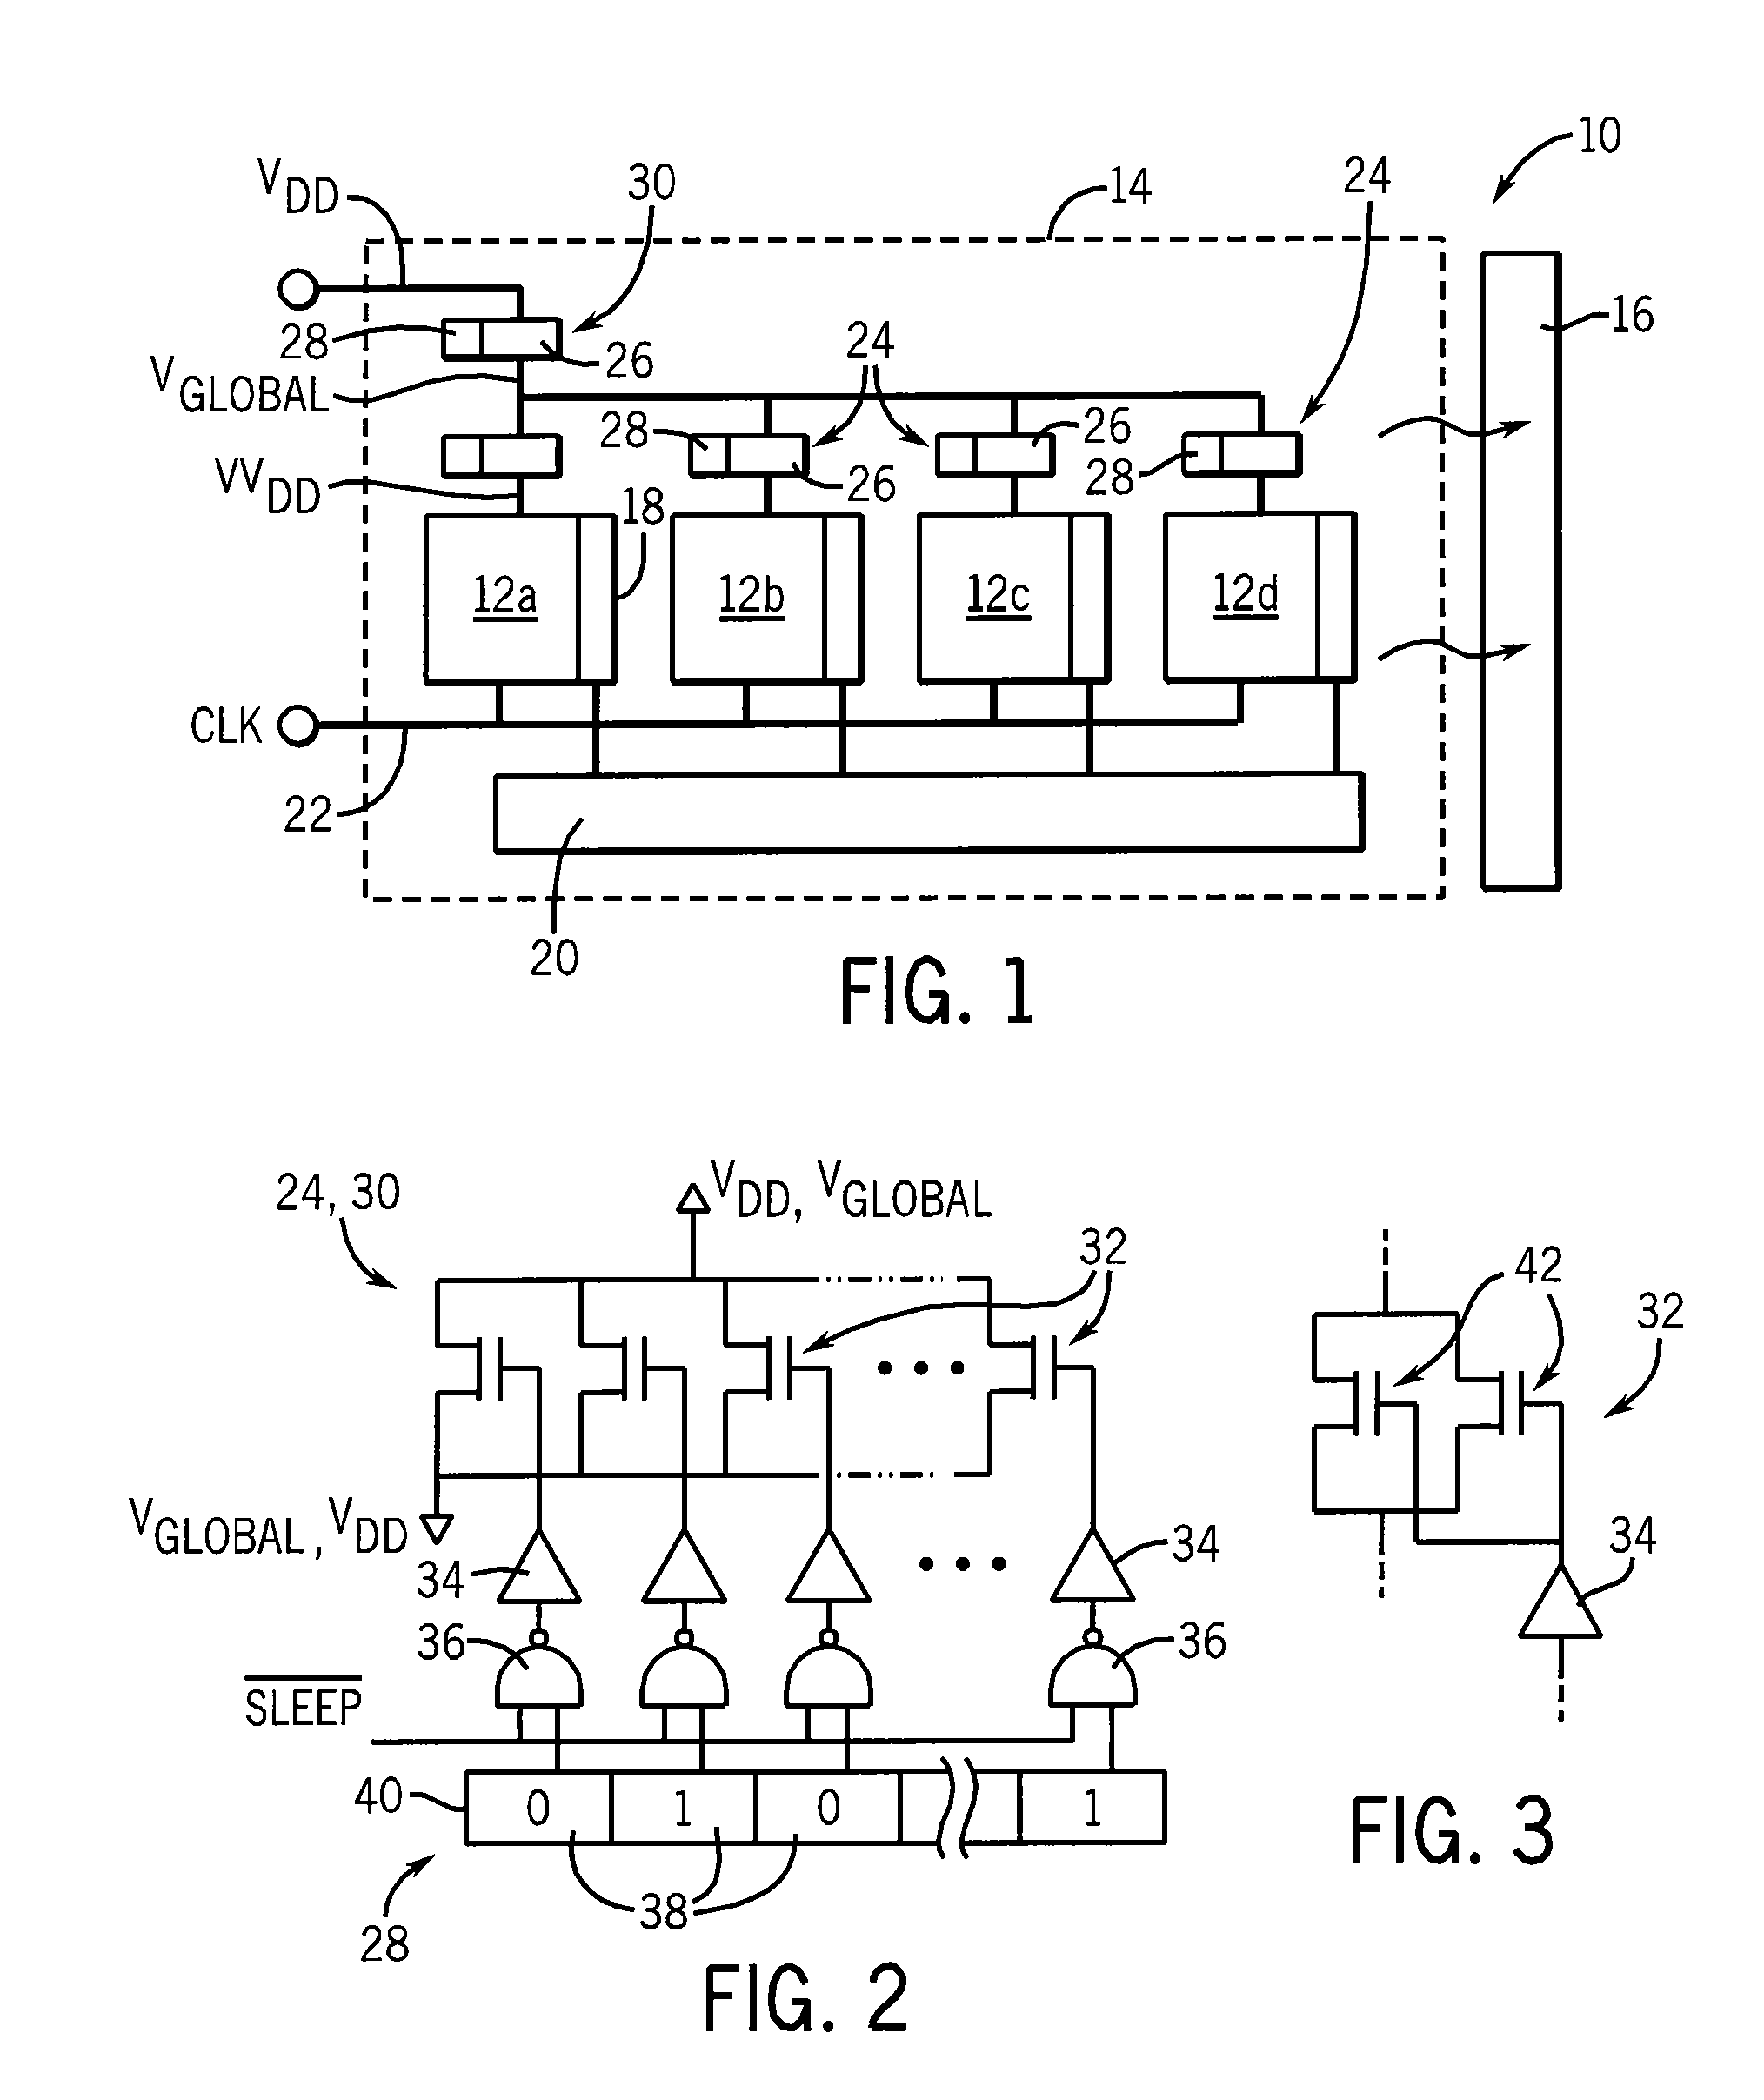 Method and Apparatus for Optimizing Clock Speed and Power Dissipation in Multicore Architectures